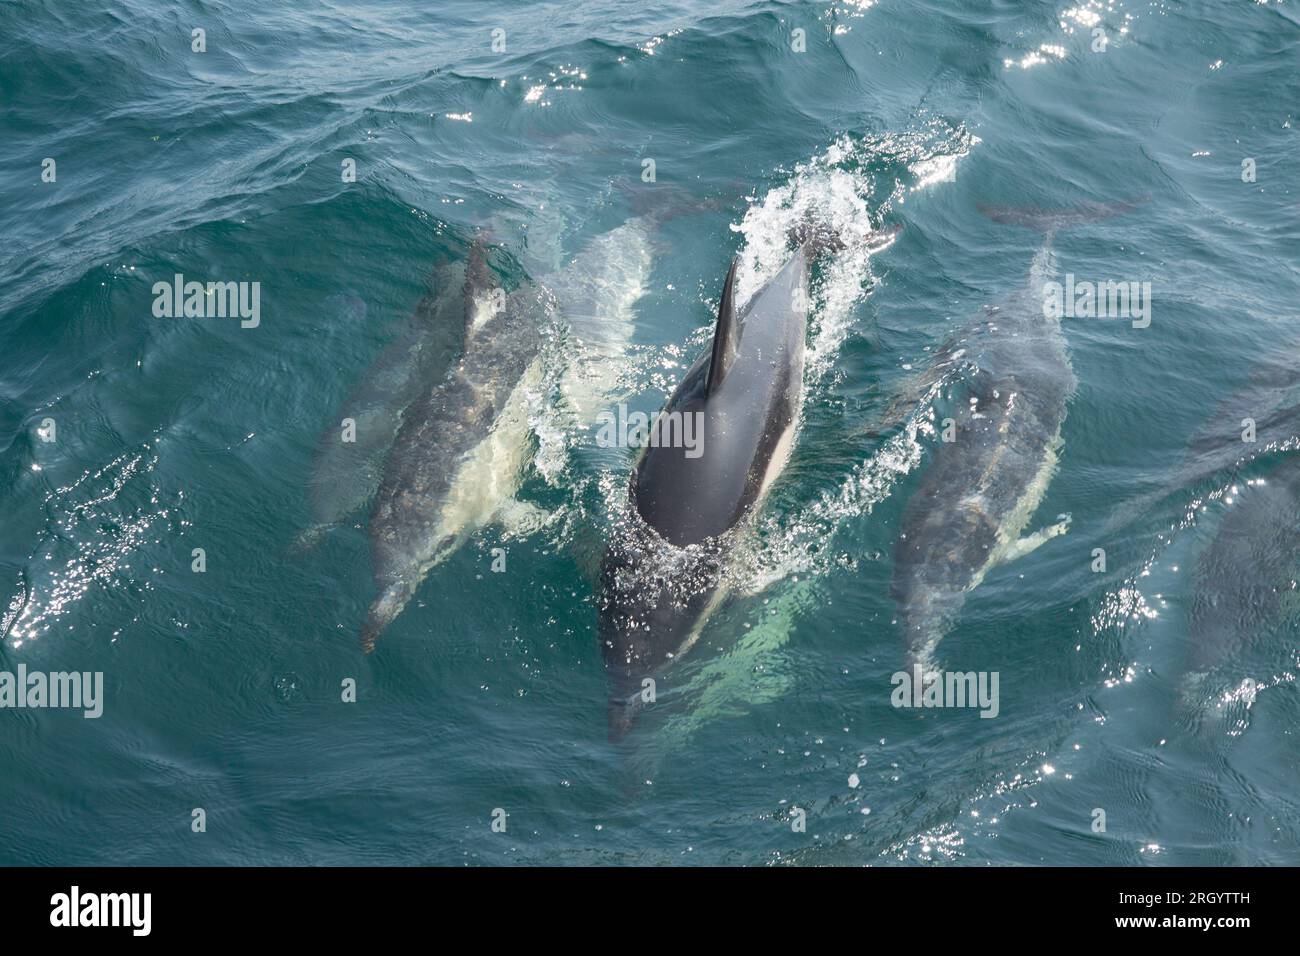 Common short beaked dolphins, Delphinus delphis, in Lyme Bay that were engaged in courtship and mating behaviour. Lyme Bay Dorset England UK GB Stock Photo